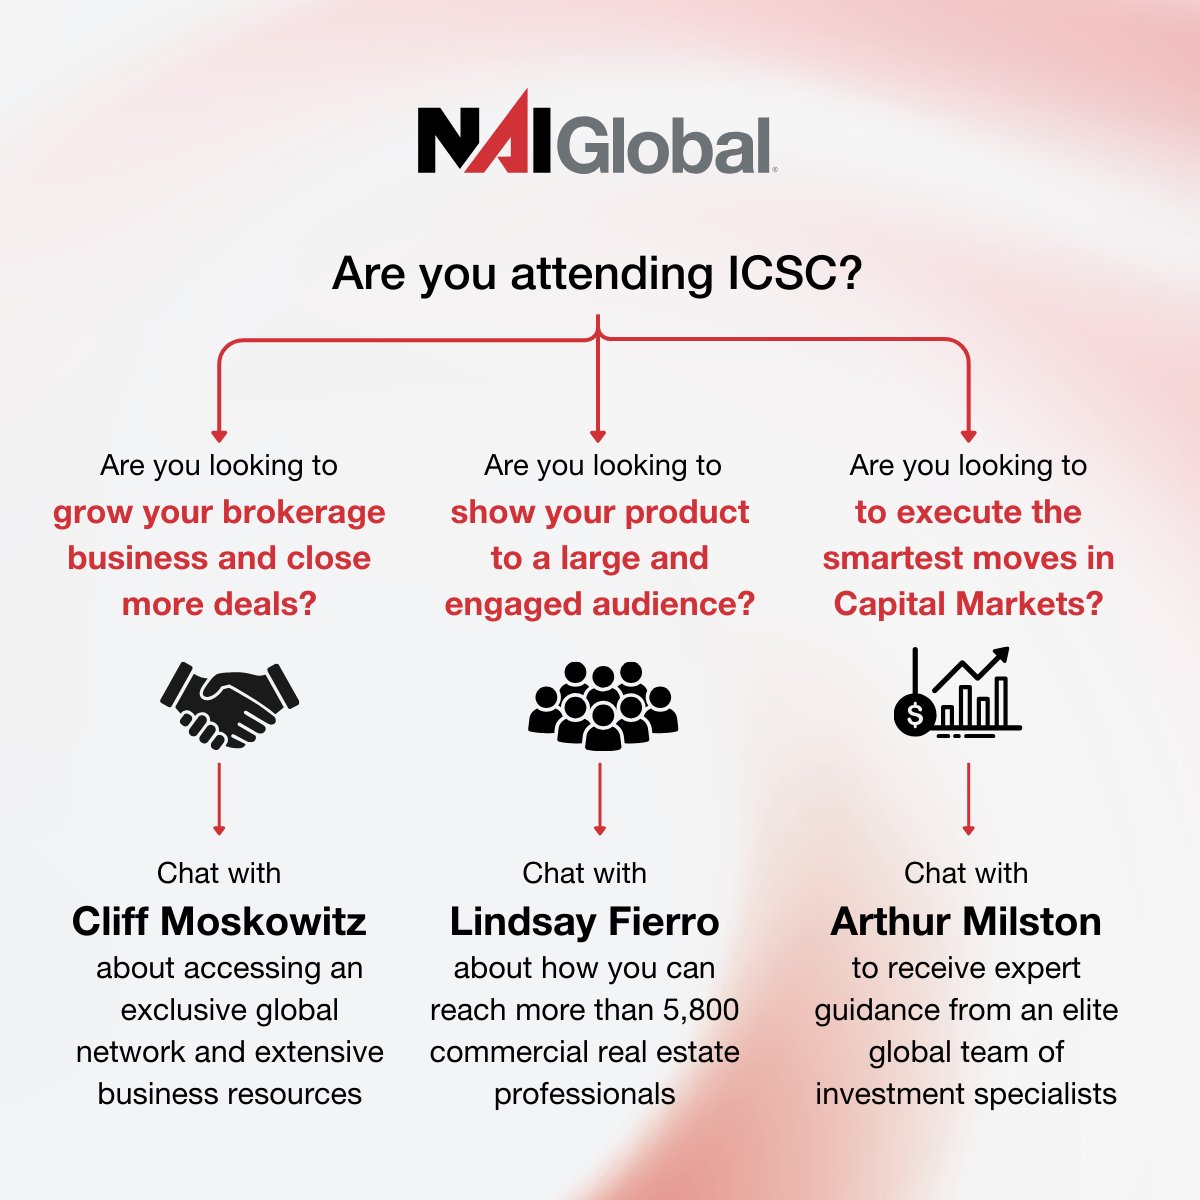 We are ready to chat about how you can unlock exclusive access to newfound opportunities and connections in #CommercialRealEstate at #ICSC2024.

Set up a meeting with the NAI team at ICSC or virtually by emailing us at info@naiglobal.com.

#CRE #CapitalMarkets